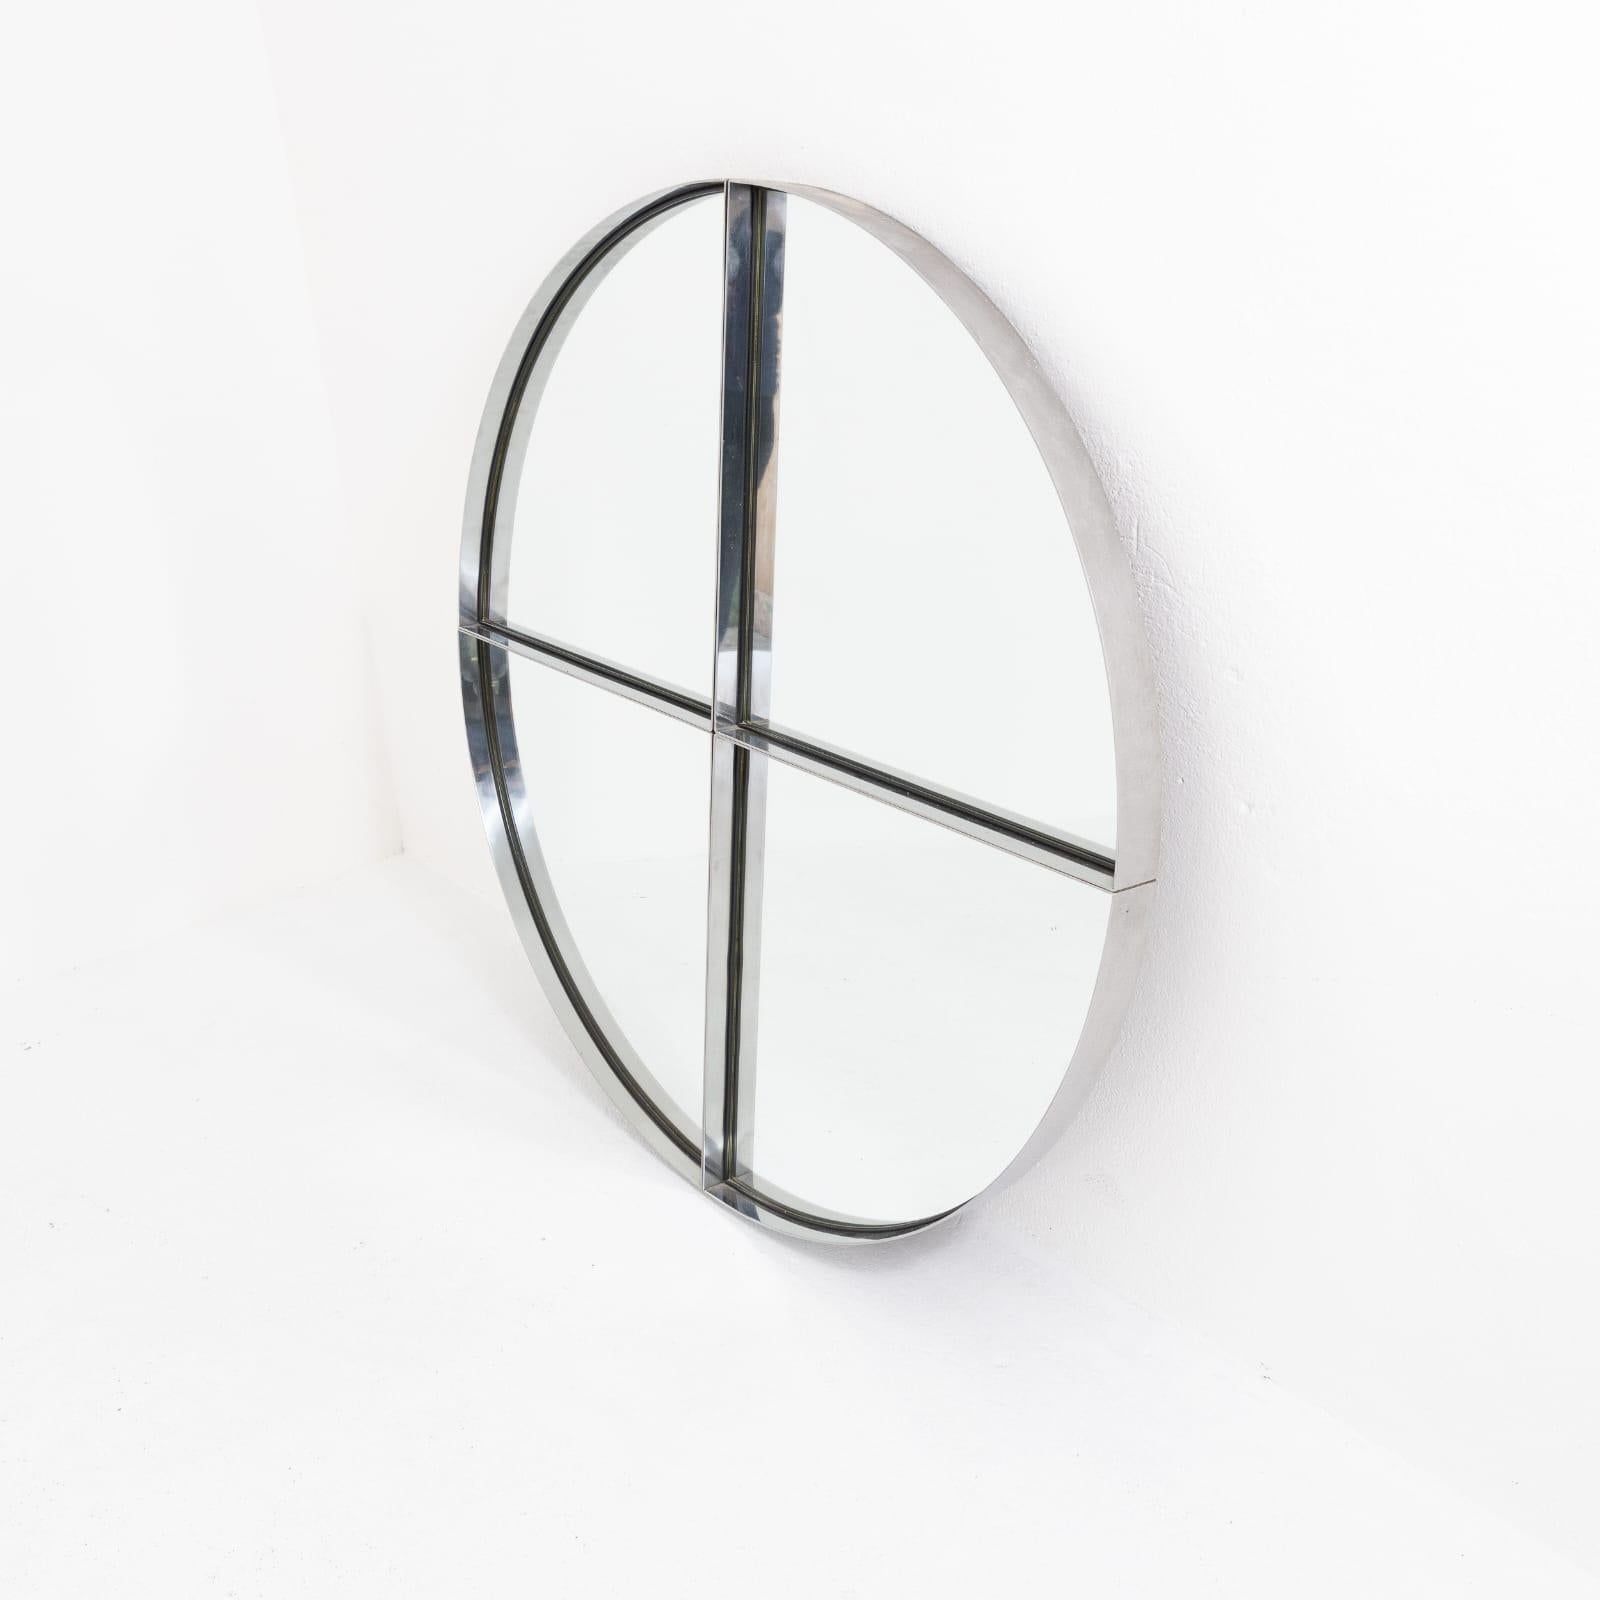 Large Steel Metal Round Mirror by Vittorio Introini for Saporiti. Italy, 1970s For Sale 3